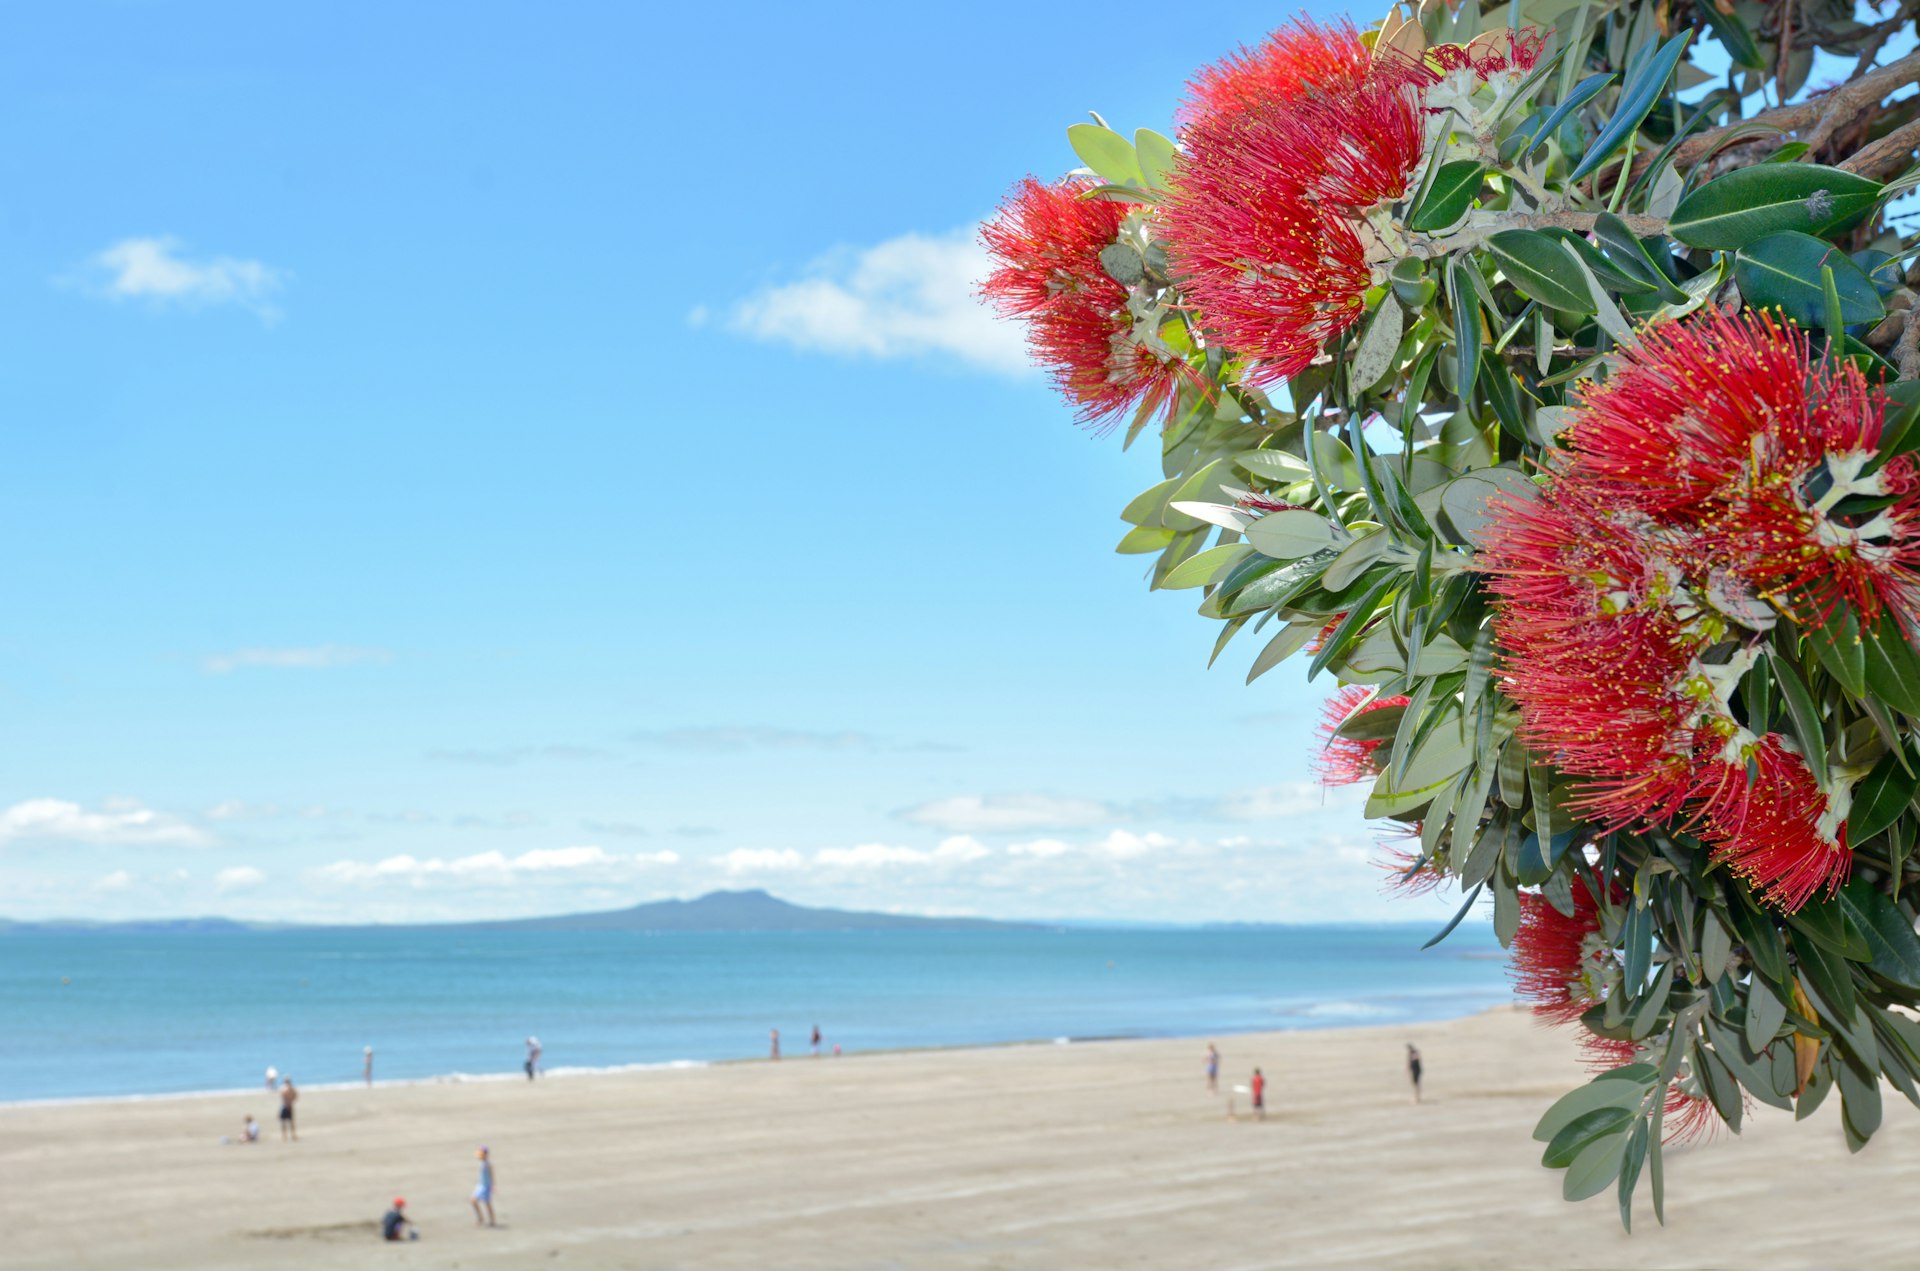 Pohutukawa red flowers blossom in the month of December in the North shore of Auckland, New Zealand.